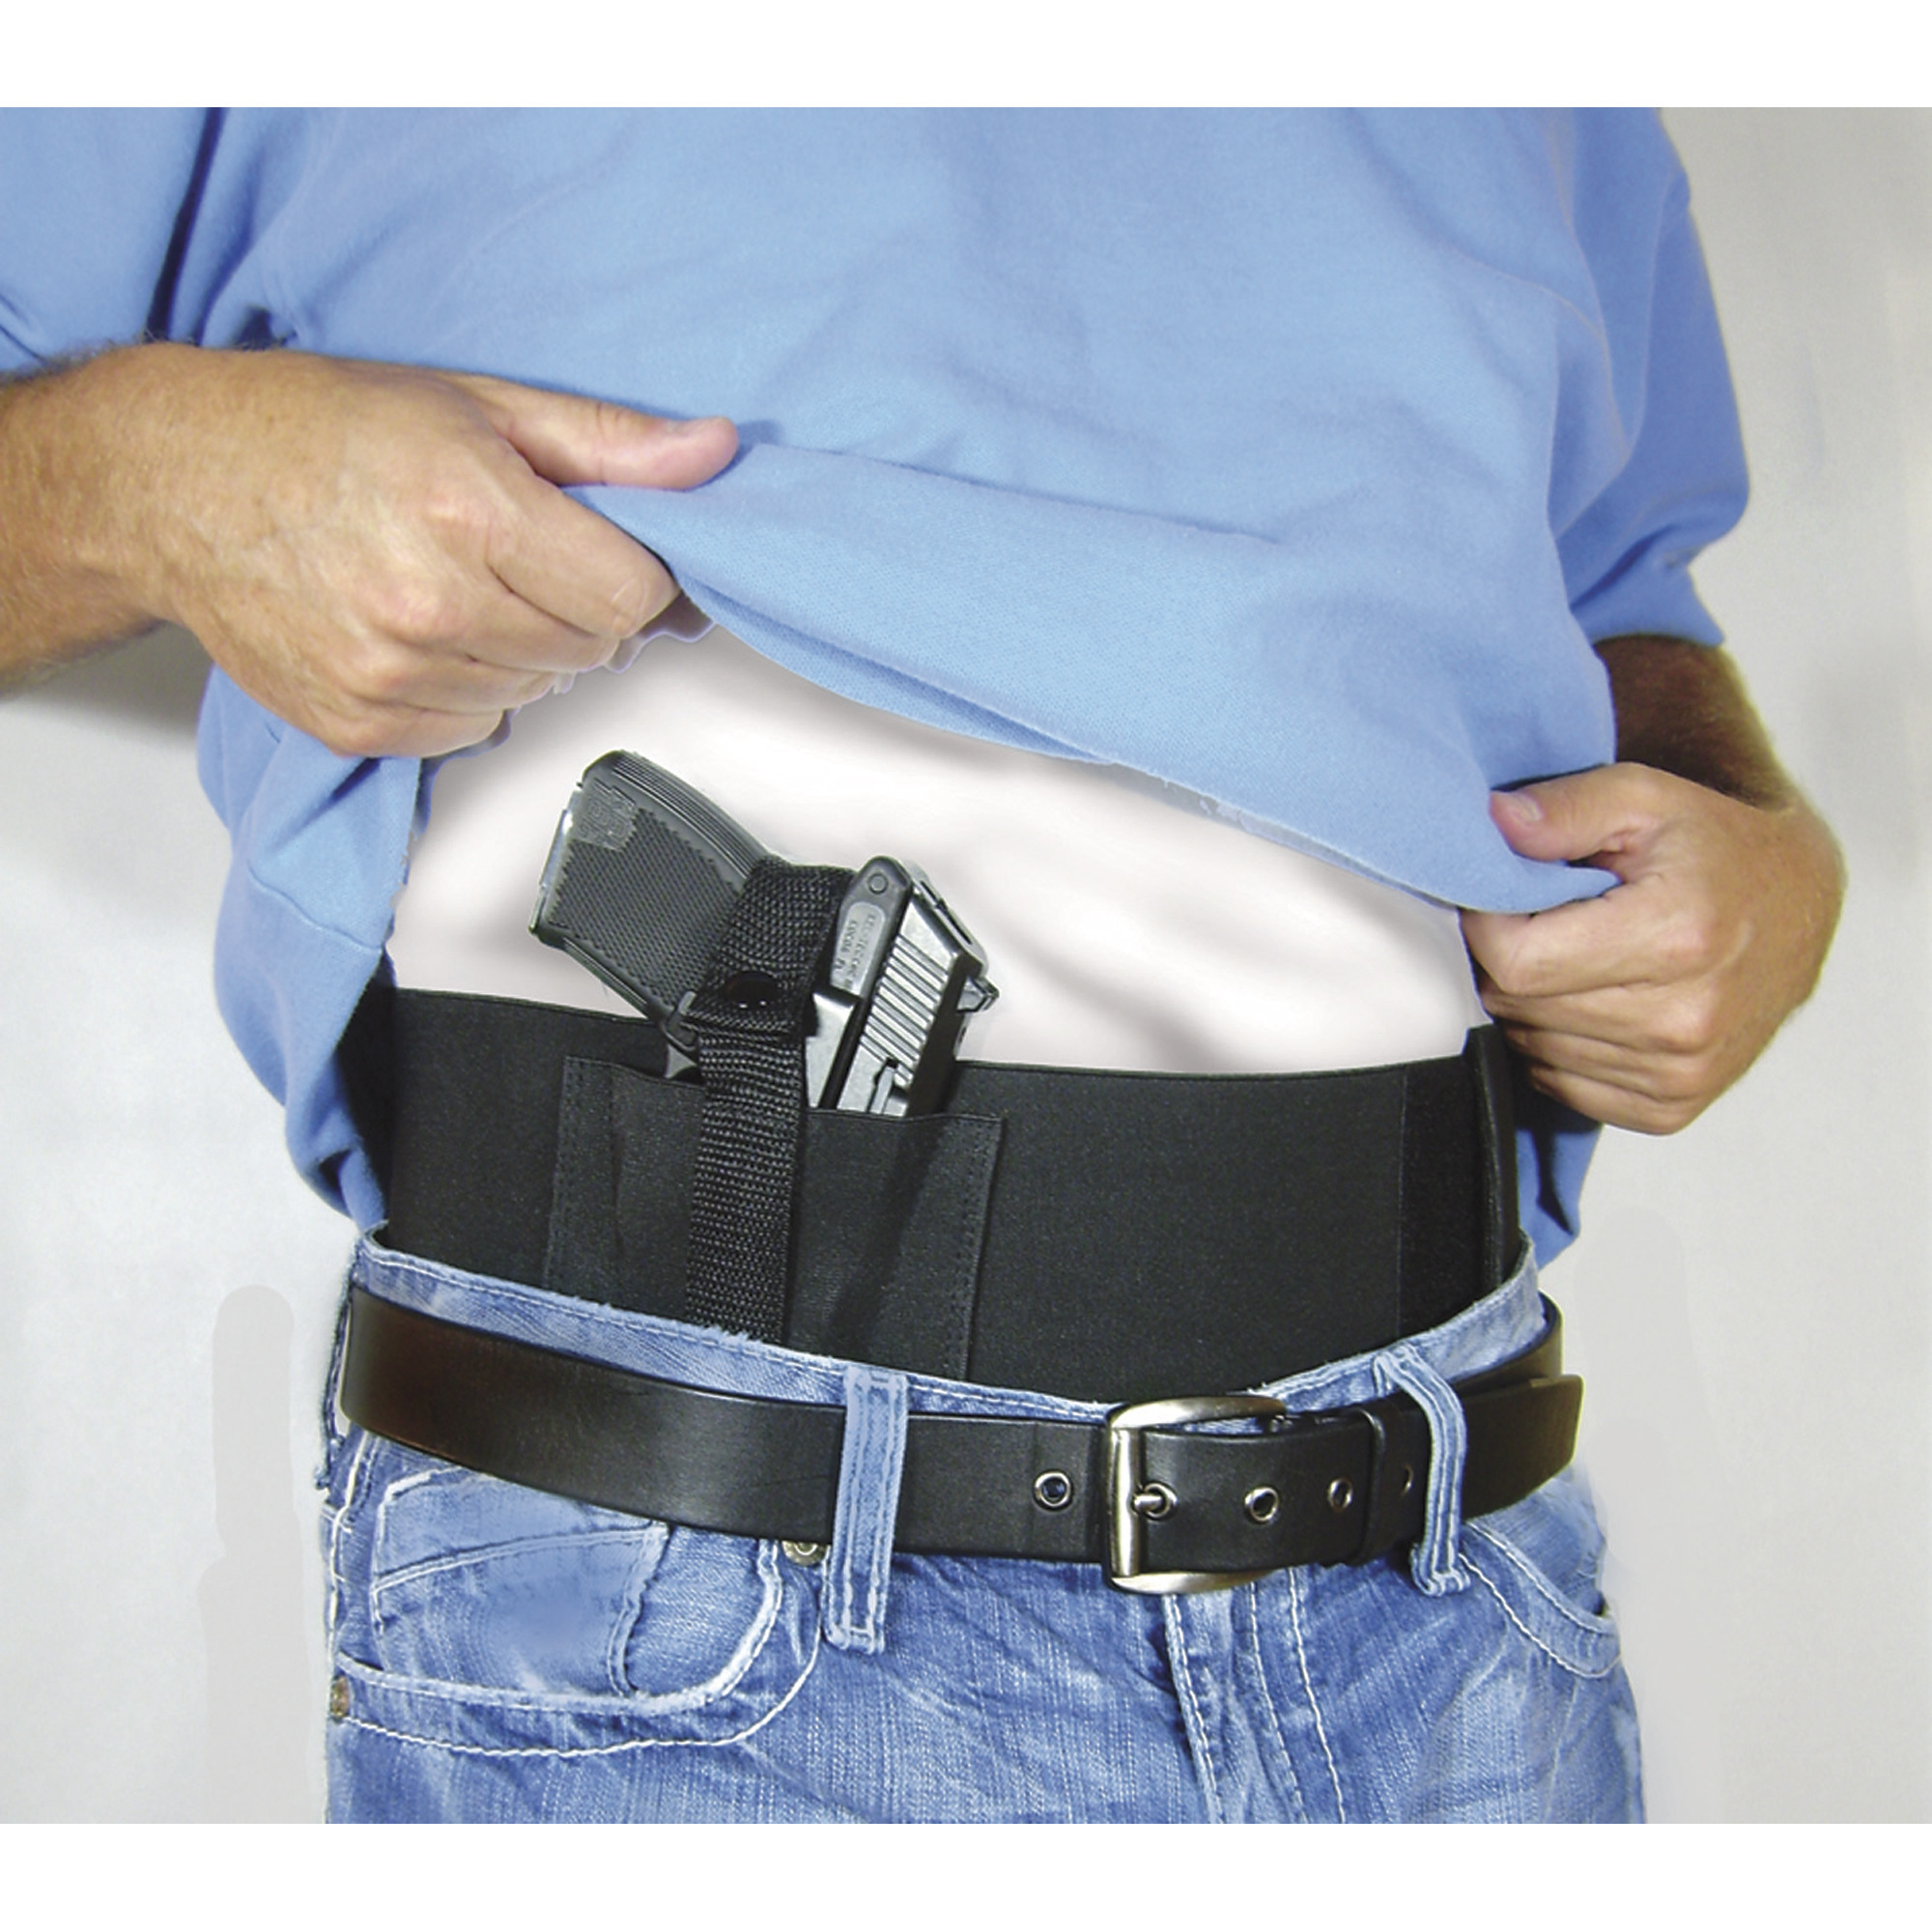 Waist Wrap Holster with 2 Mag Pockets â Conceal and Carry with Safety and Ease â Medium